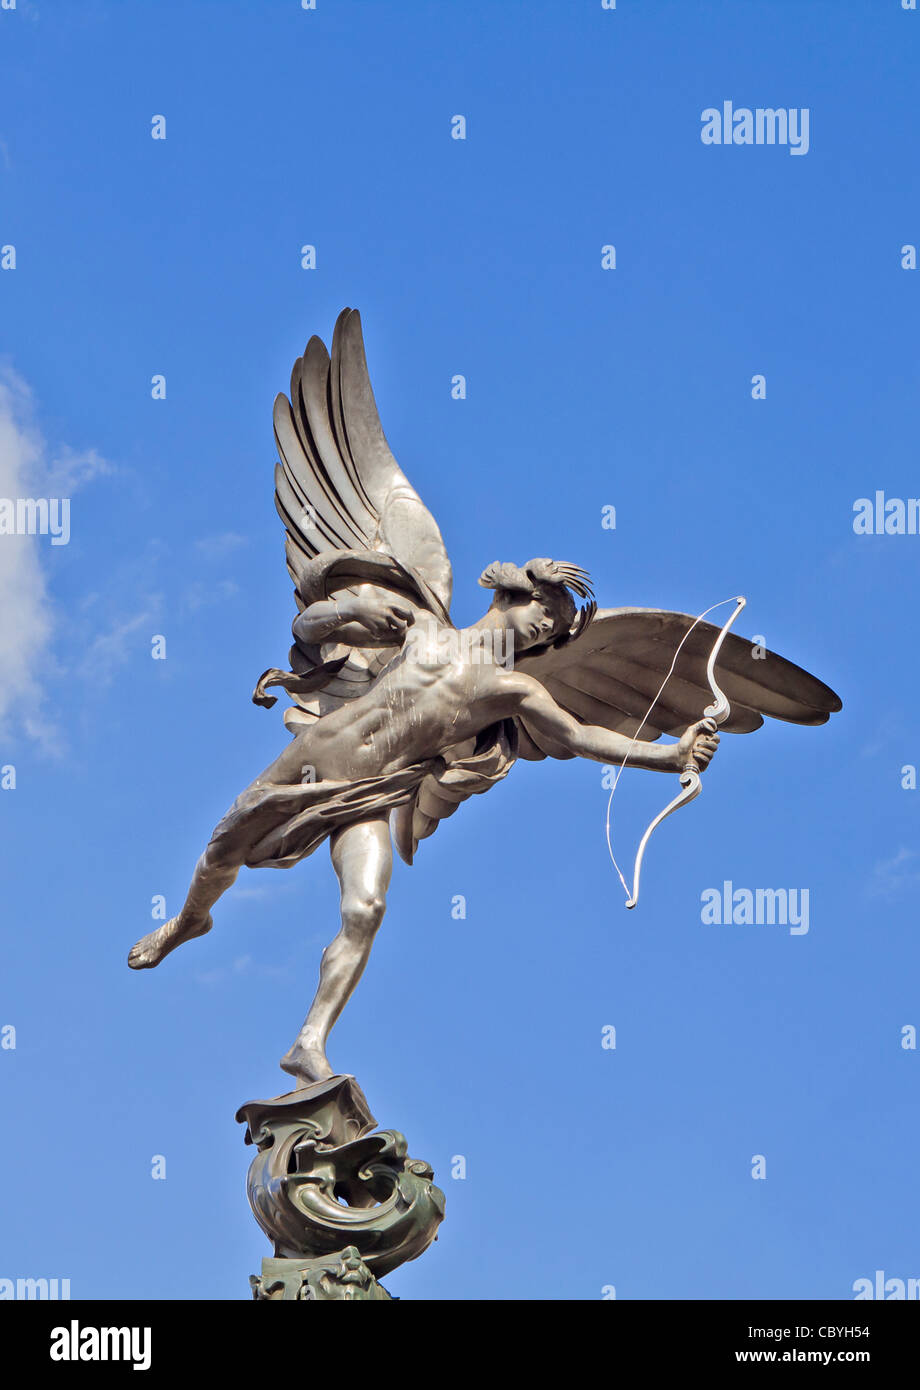 Eros statue in Piccadilly Circus London Stock Photo